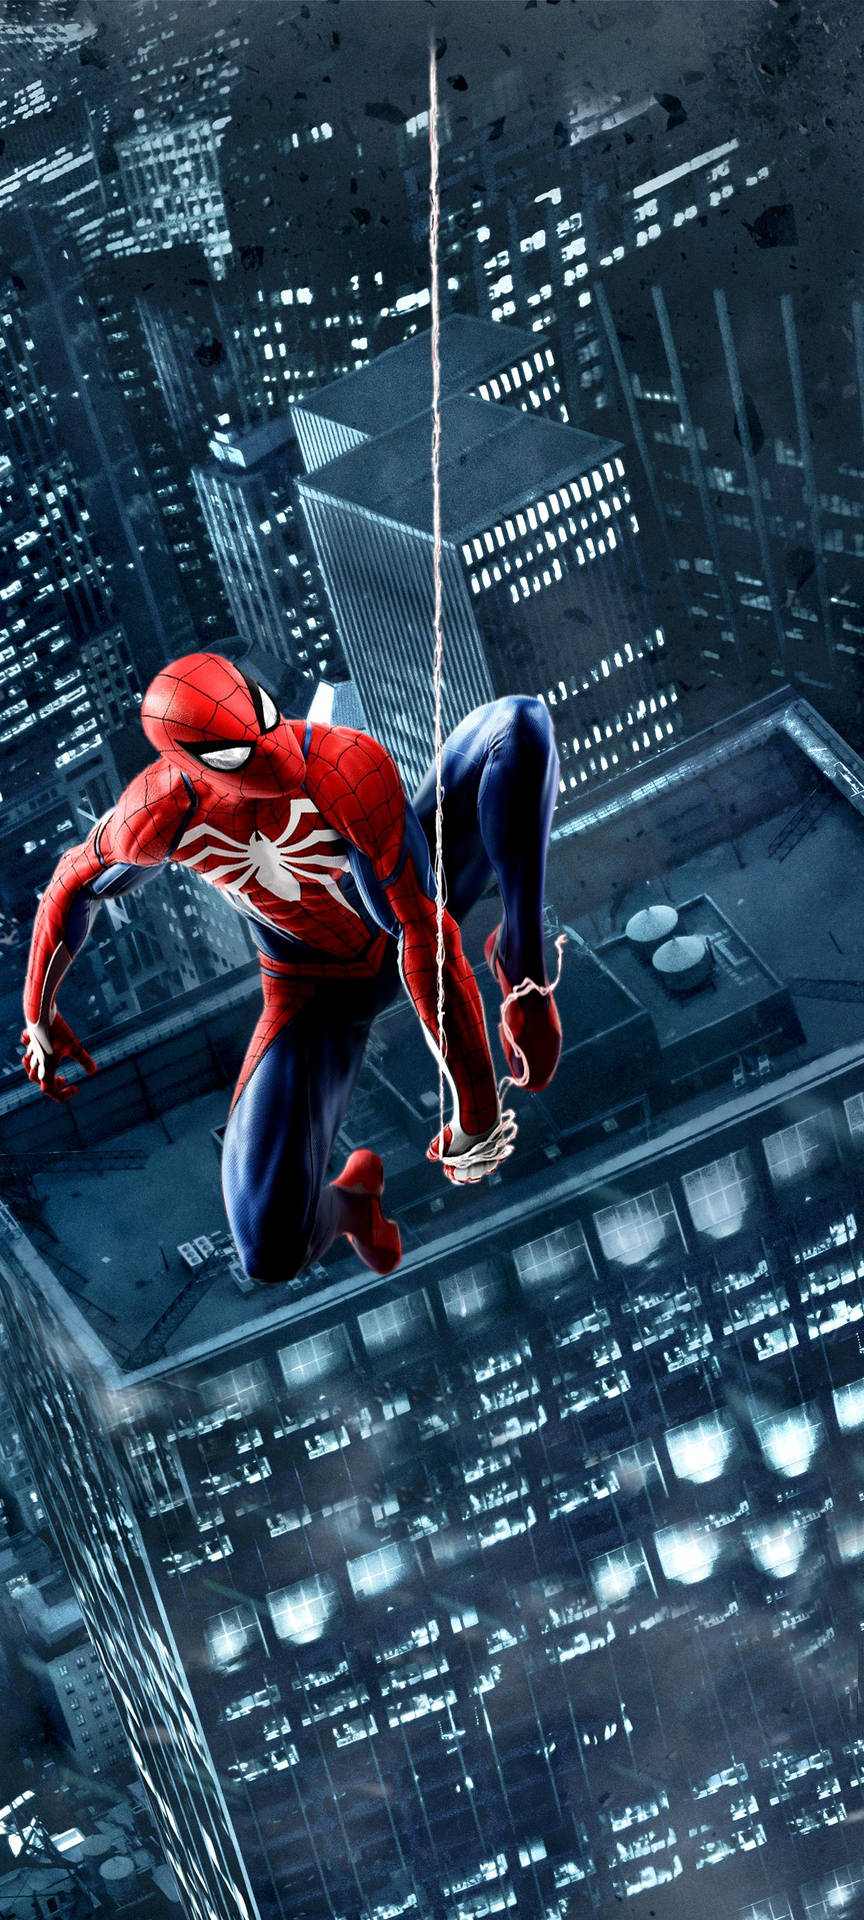 Spiderman Shooting Webs By The Punch Hole Background